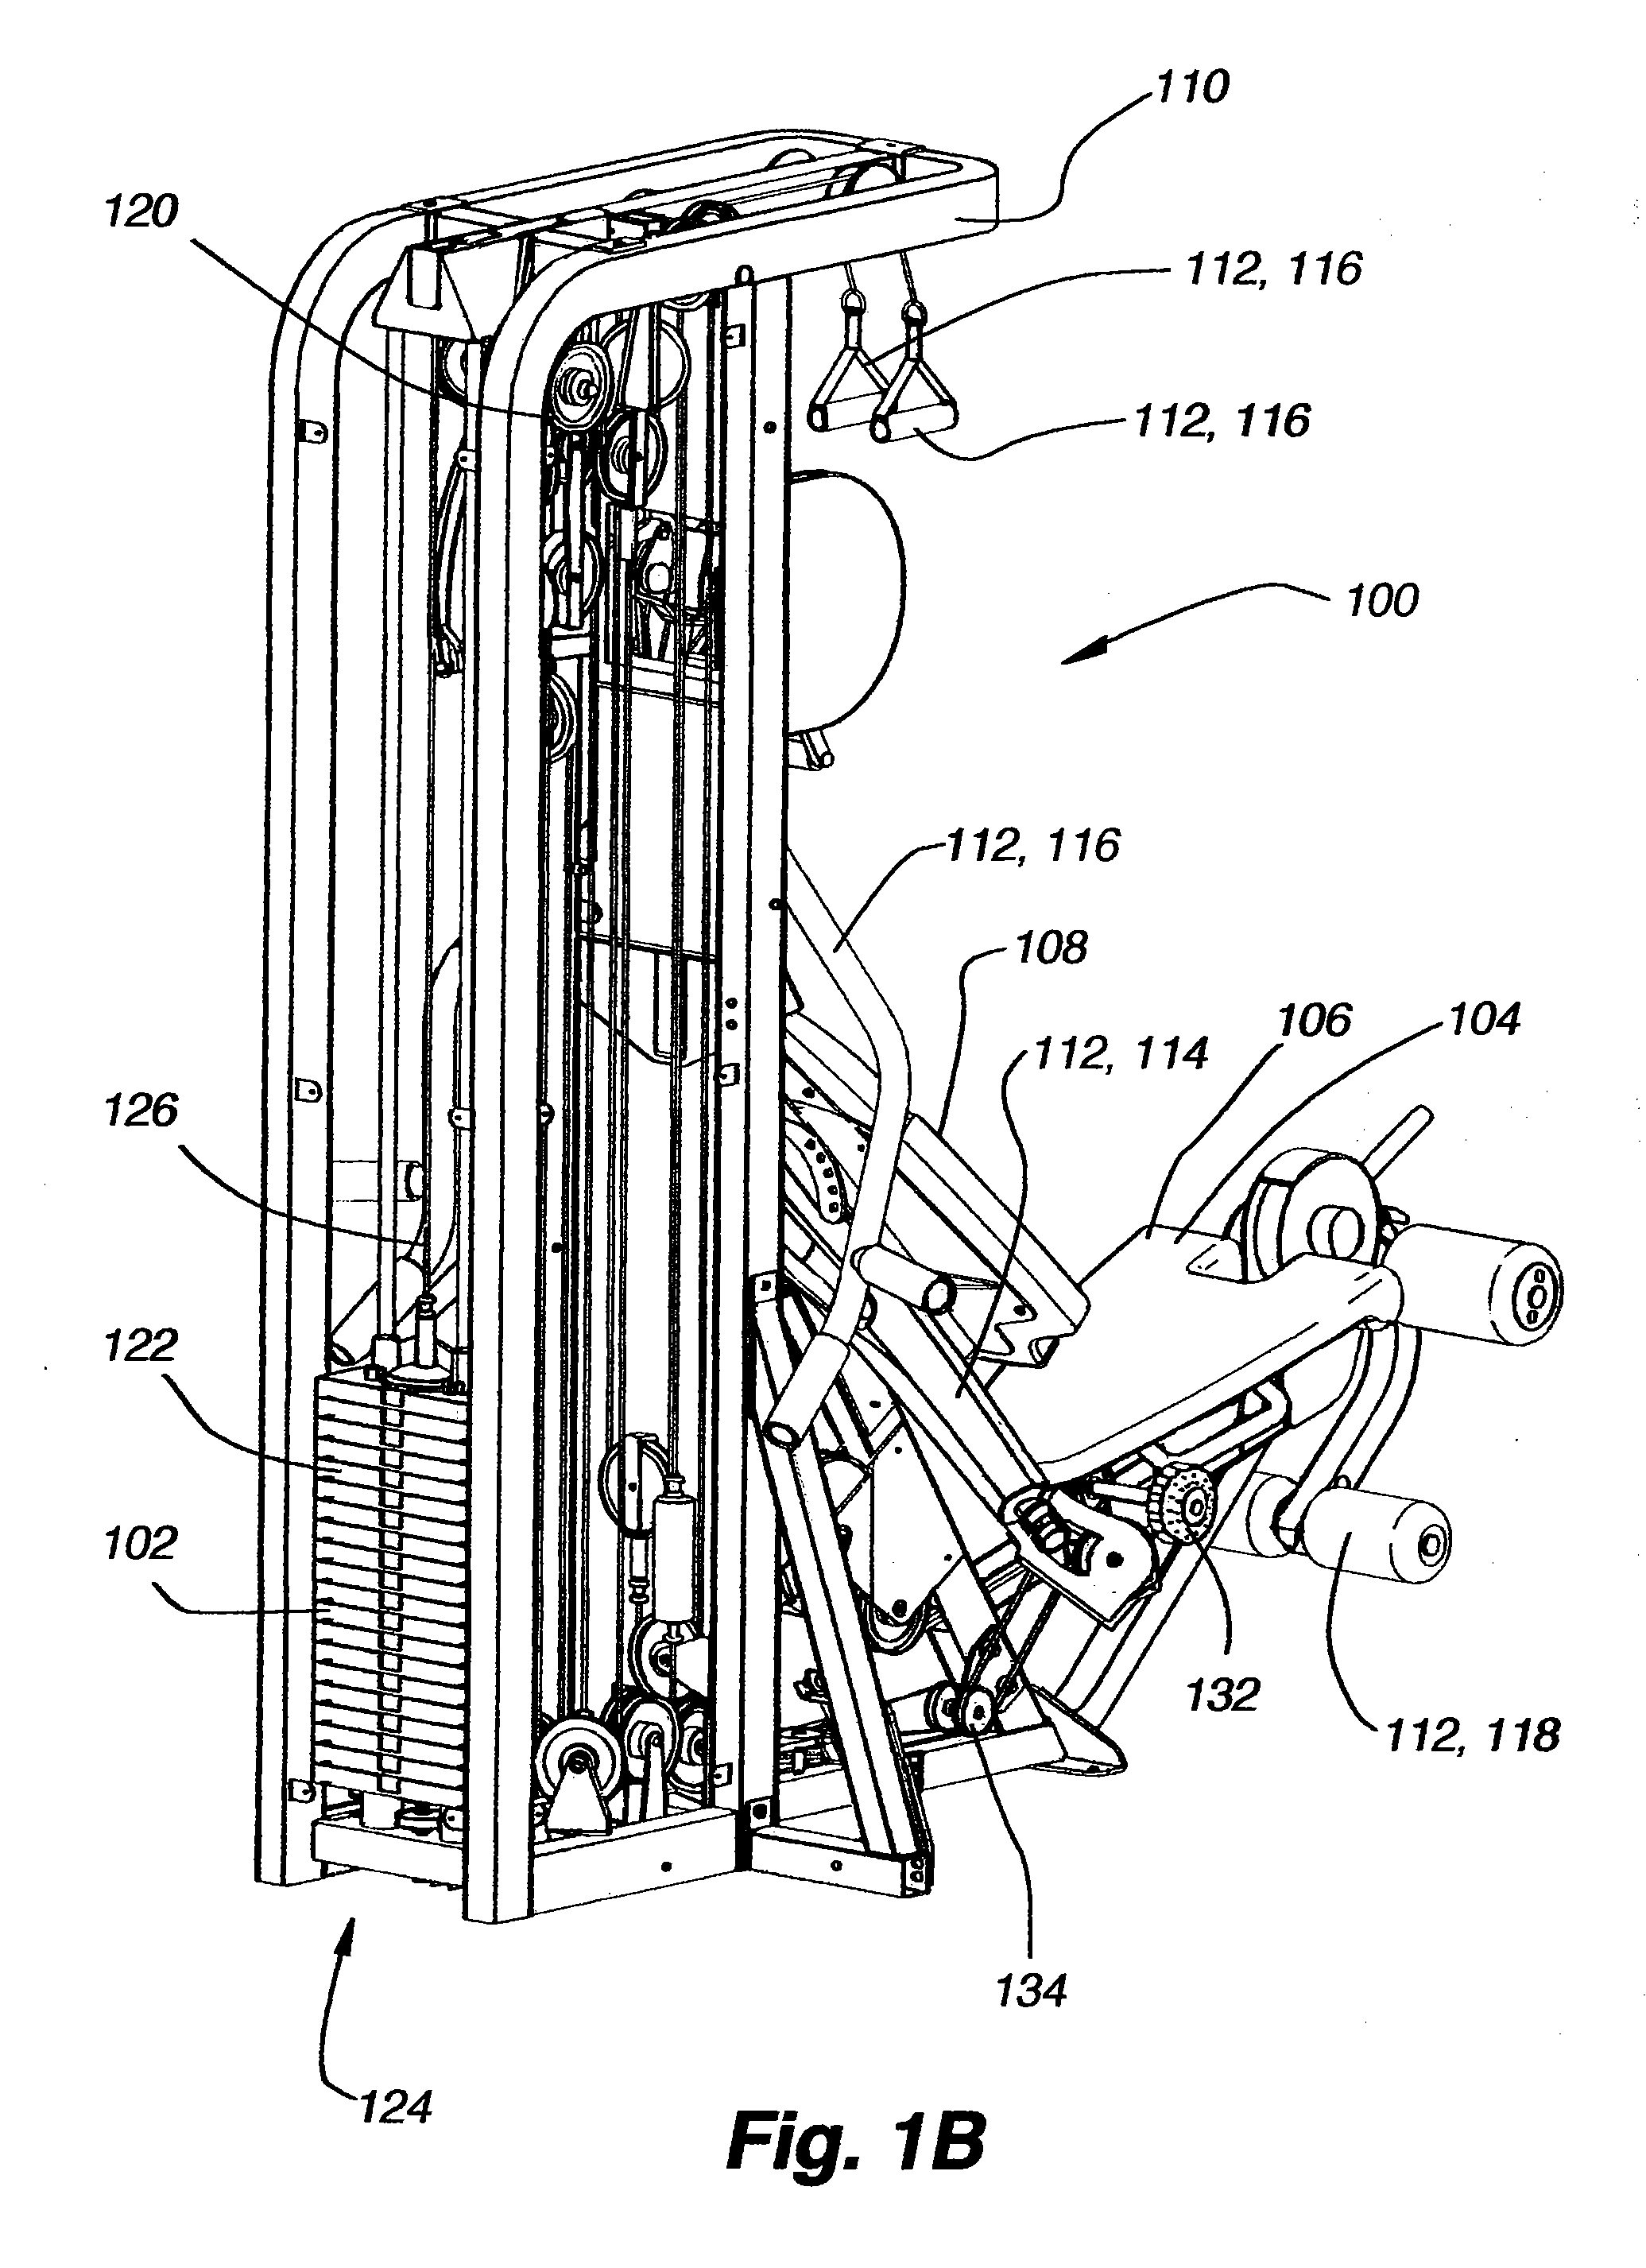 Weight selection apparatus for a weight stack